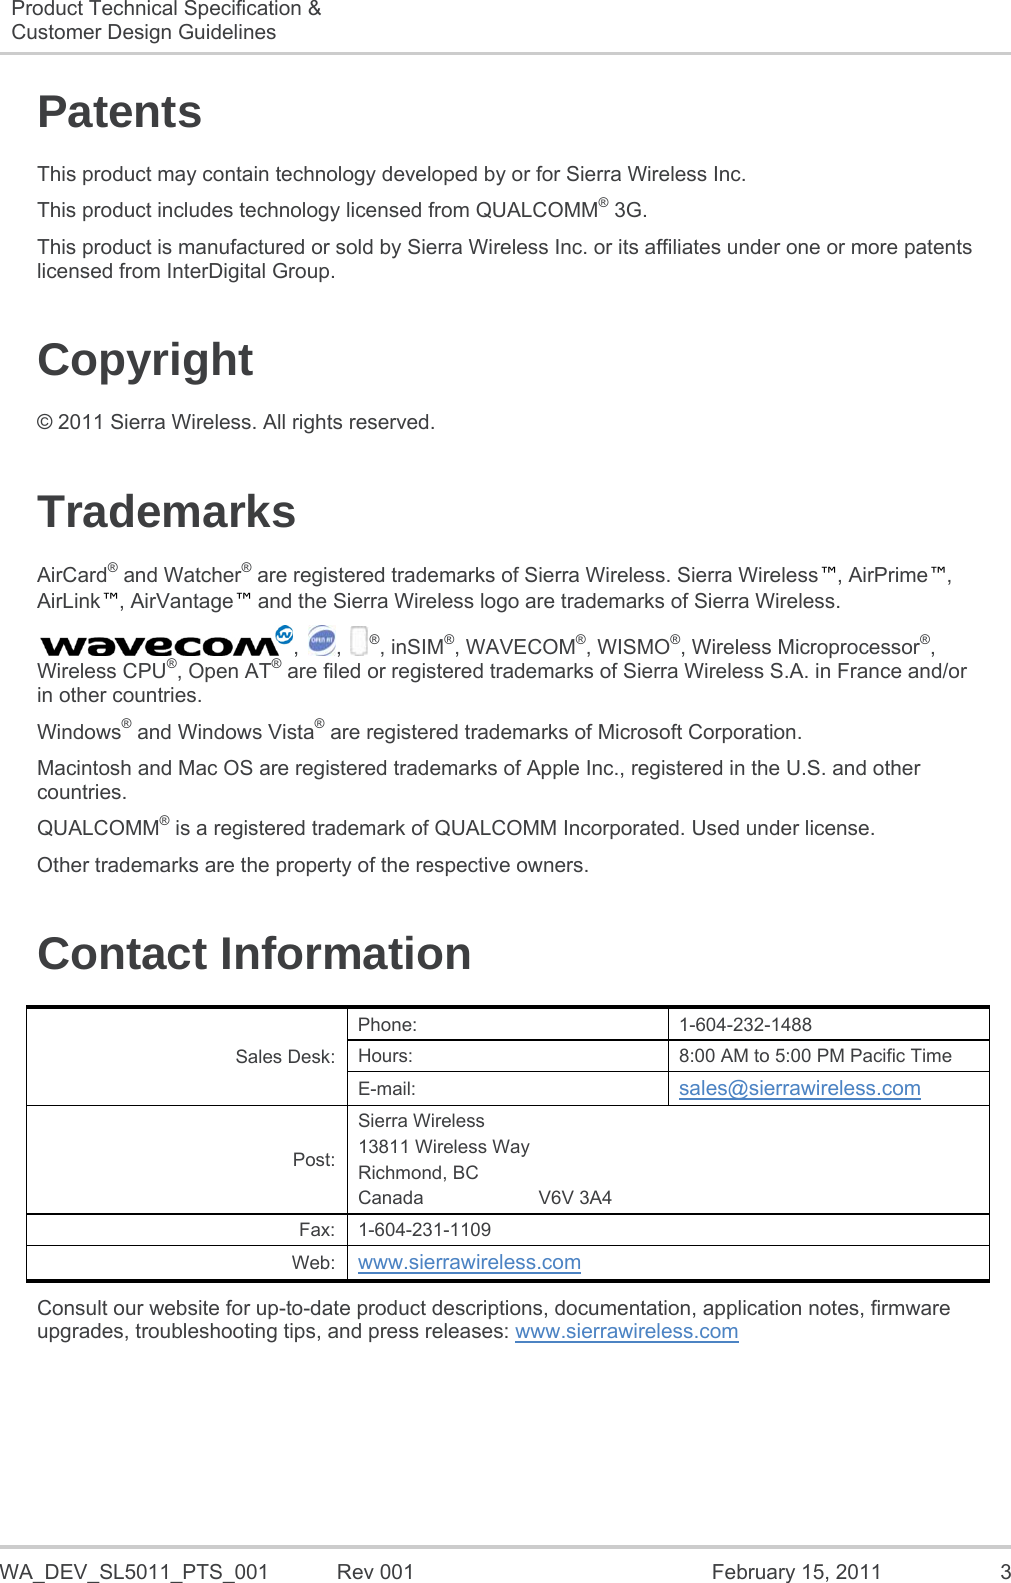   WA_DEV_SL5011_PTS_001  Rev 001  February 15, 2011  3 Product Technical Specification &amp; Customer Design Guidelines   Patents This product may contain technology developed by or for Sierra Wireless Inc. This product includes technology licensed from QUALCOMM® 3G. This product is manufactured or sold by Sierra Wireless Inc. or its affiliates under one or more patents licensed from InterDigital Group. Copyright © 2011 Sierra Wireless. All rights reserved. Trademarks AirCard® and Watcher® are registered trademarks of Sierra Wireless. Sierra Wireless™, AirPrime™, AirLink™, AirVantage™ and the Sierra Wireless logo are trademarks of Sierra Wireless. , , ®, inSIM®, WAVECOM®, WISMO®, Wireless Microprocessor®, Wireless CPU®, Open AT® are filed or registered trademarks of Sierra Wireless S.A. in France and/or in other countries. Windows® and Windows Vista® are registered trademarks of Microsoft Corporation. Macintosh and Mac OS are registered trademarks of Apple Inc., registered in the U.S. and other countries. QUALCOMM® is a registered trademark of QUALCOMM Incorporated. Used under license. Other trademarks are the property of the respective owners. Contact Information Sales Desk: Phone: 1-604-232-1488 Hours:  8:00 AM to 5:00 PM Pacific Time E-mail:  sales@sierrawireless.com Post: Sierra Wireless 13811 Wireless Way Richmond, BC Canada                      V6V 3A4 Fax: 1-604-231-1109 Web:  www.sierrawireless.com Consult our website for up-to-date product descriptions, documentation, application notes, firmware upgrades, troubleshooting tips, and press releases: www.sierrawireless.com   